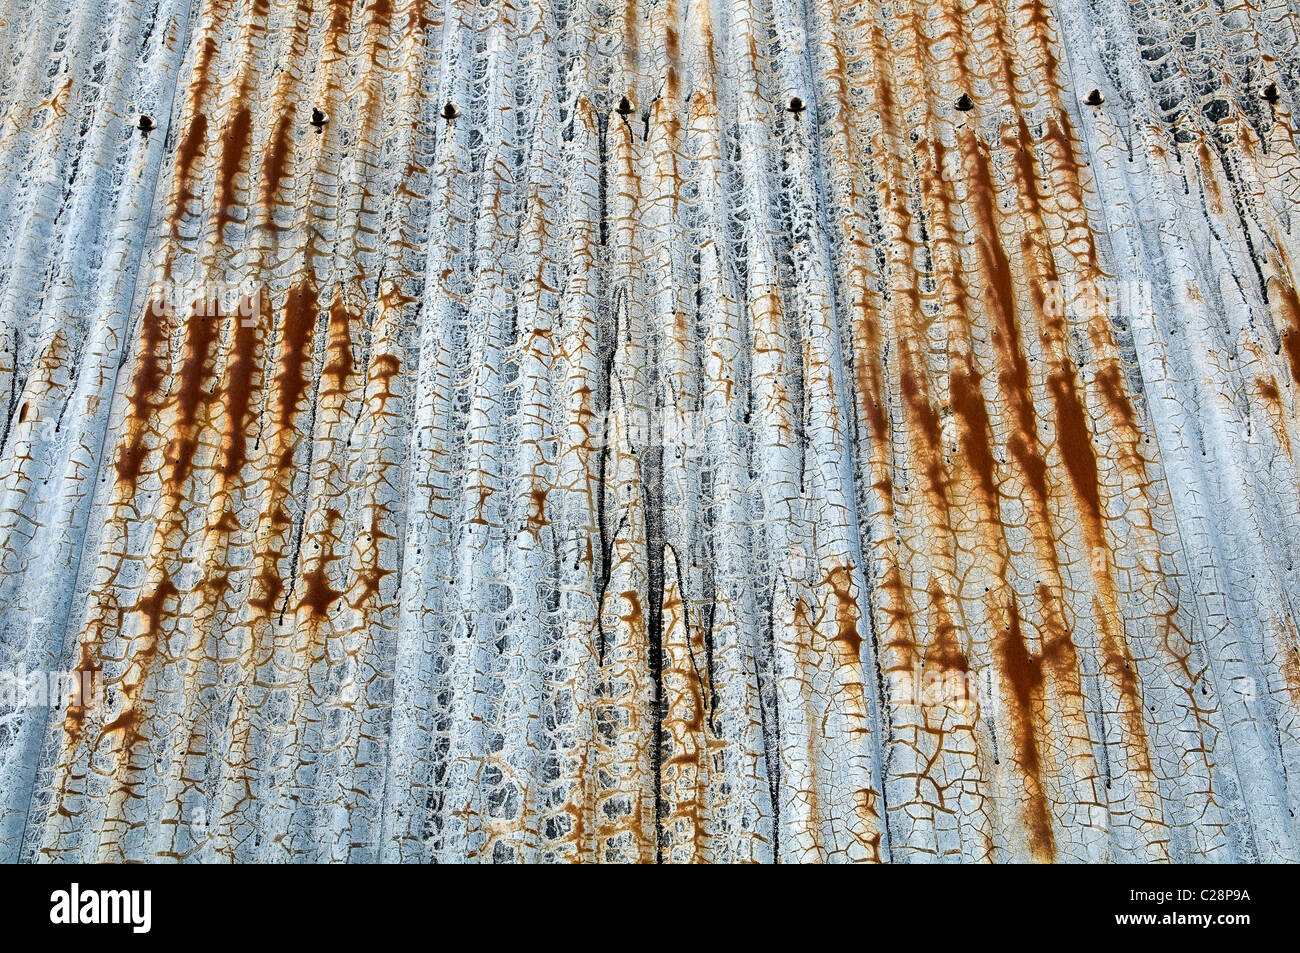 Interesting patterns on the side of a corrugated steel barn Stock Photo